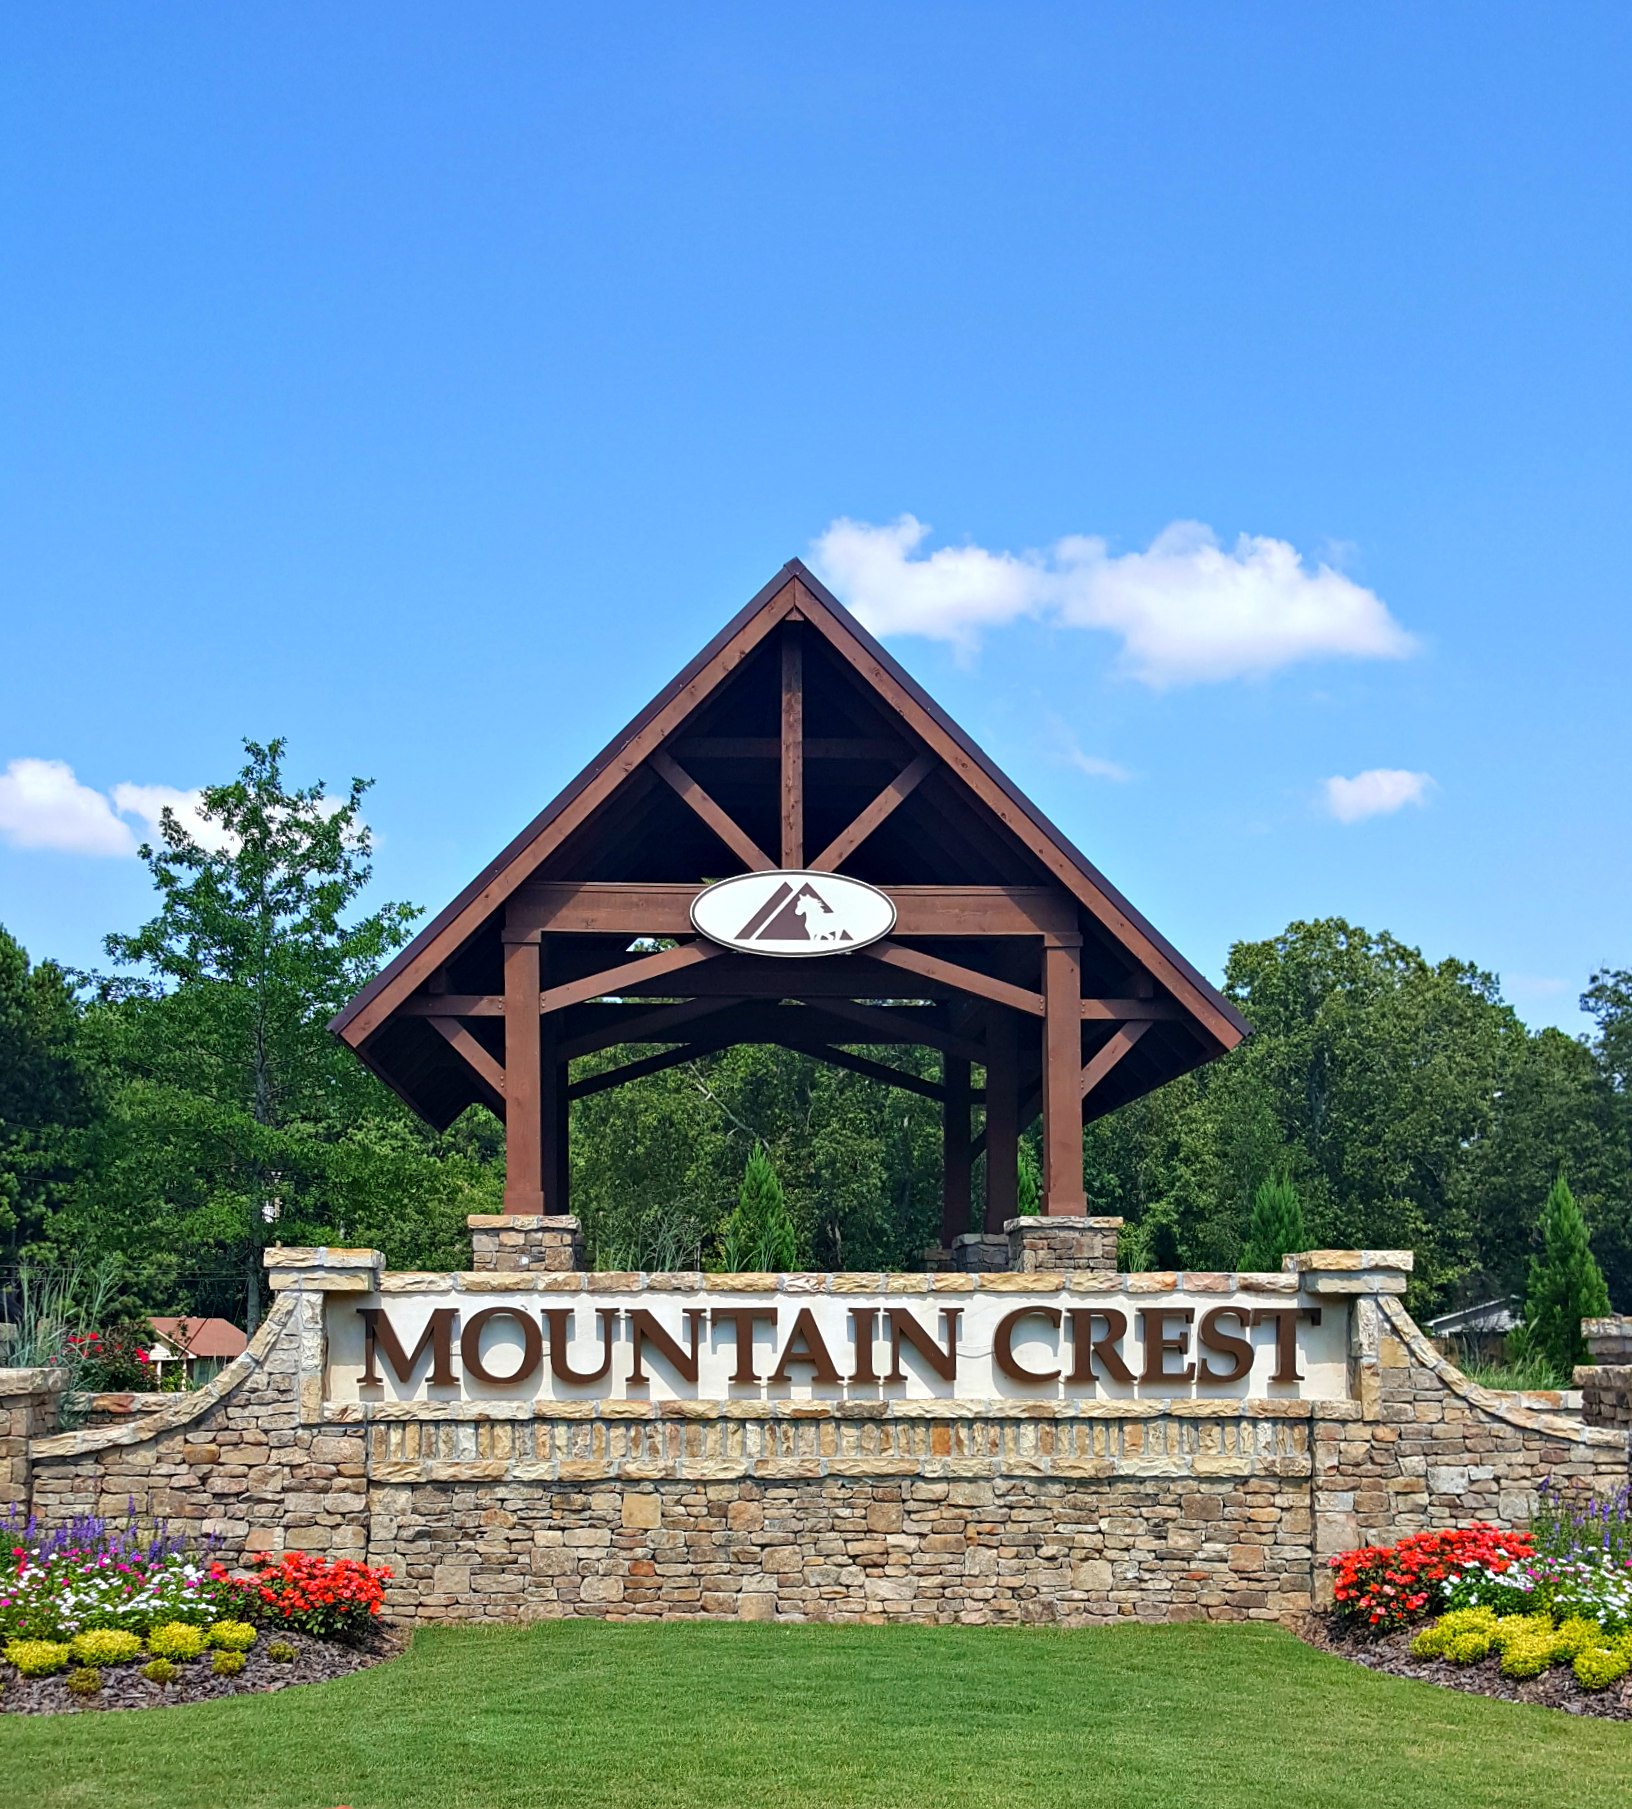 to Mountain Crest Real Estate Cumming GA Mountain Crest Homes